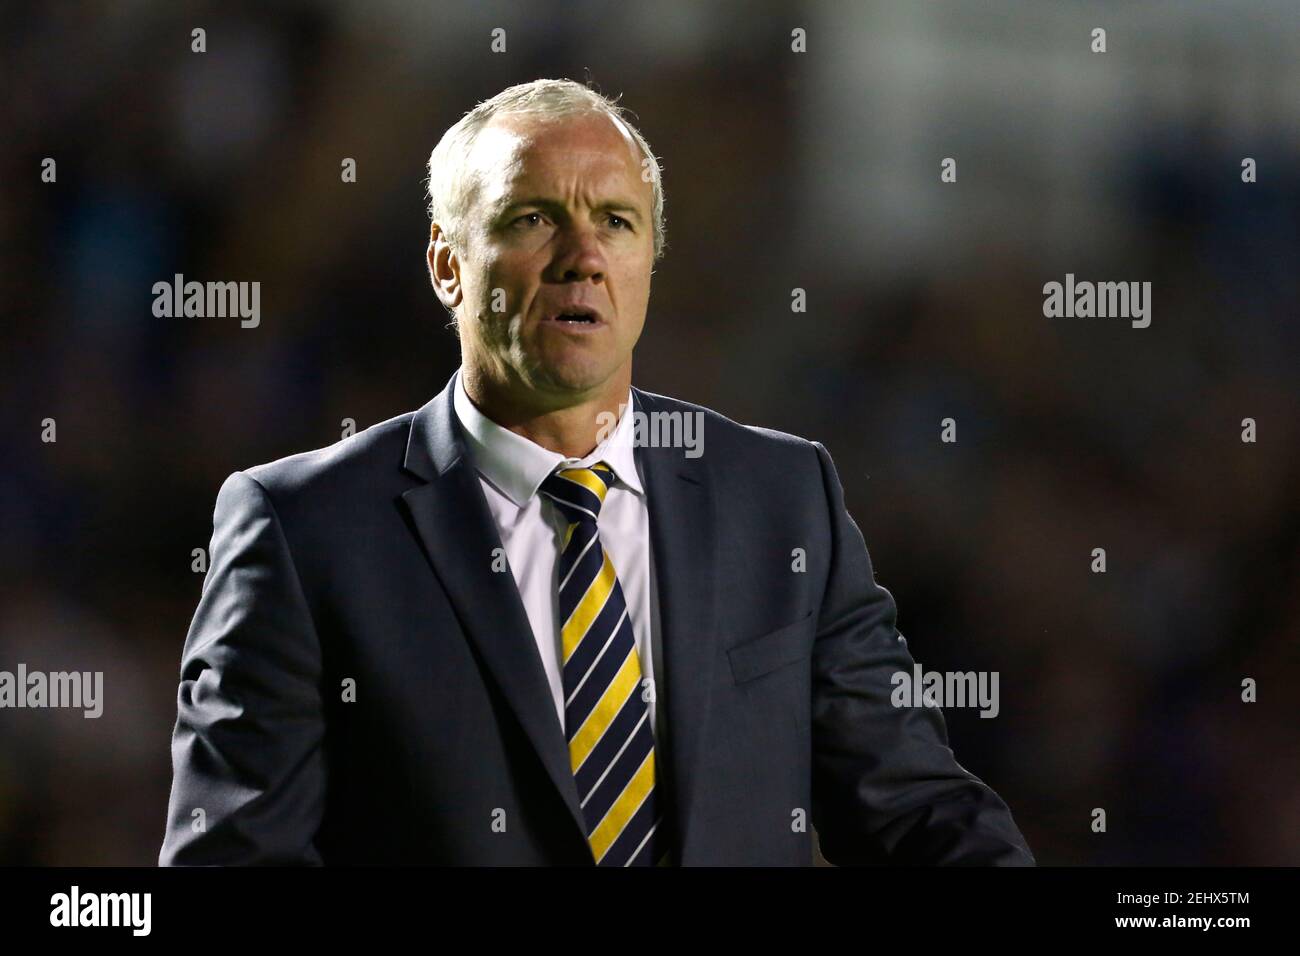 Rugby League - Leeds Rhinos v St Helens - Ladbrokes Challenge Cup Semi Final - The Halliwell Jones Stadium - 31/7/15 Leeds Rhinos head coach Brian McDermott Mandatory Credit: Action Images / Ed Sykes  EDITORIAL USE ONLY. Stock Photo